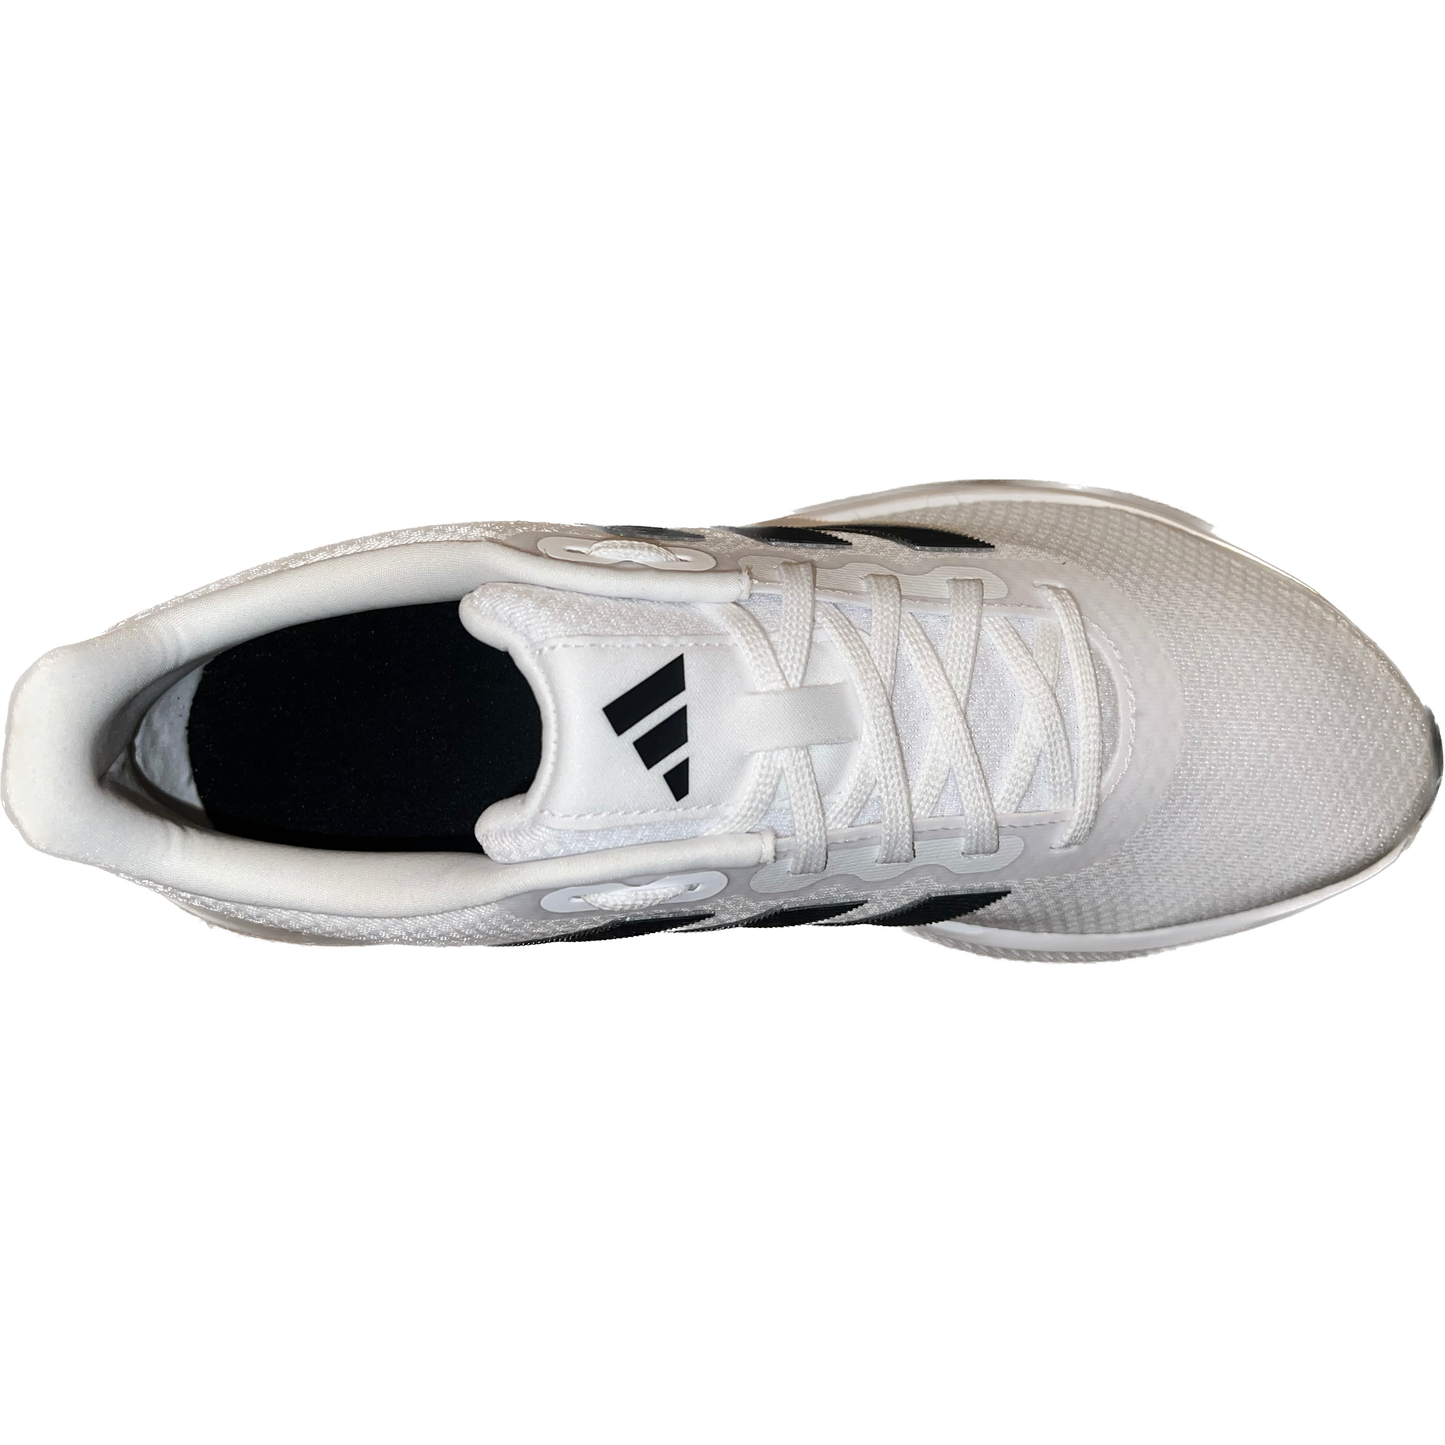 Pre-Spiked Adidas Runfalcon 3.0 Men's Trainers Cricket Shoes - White / Black